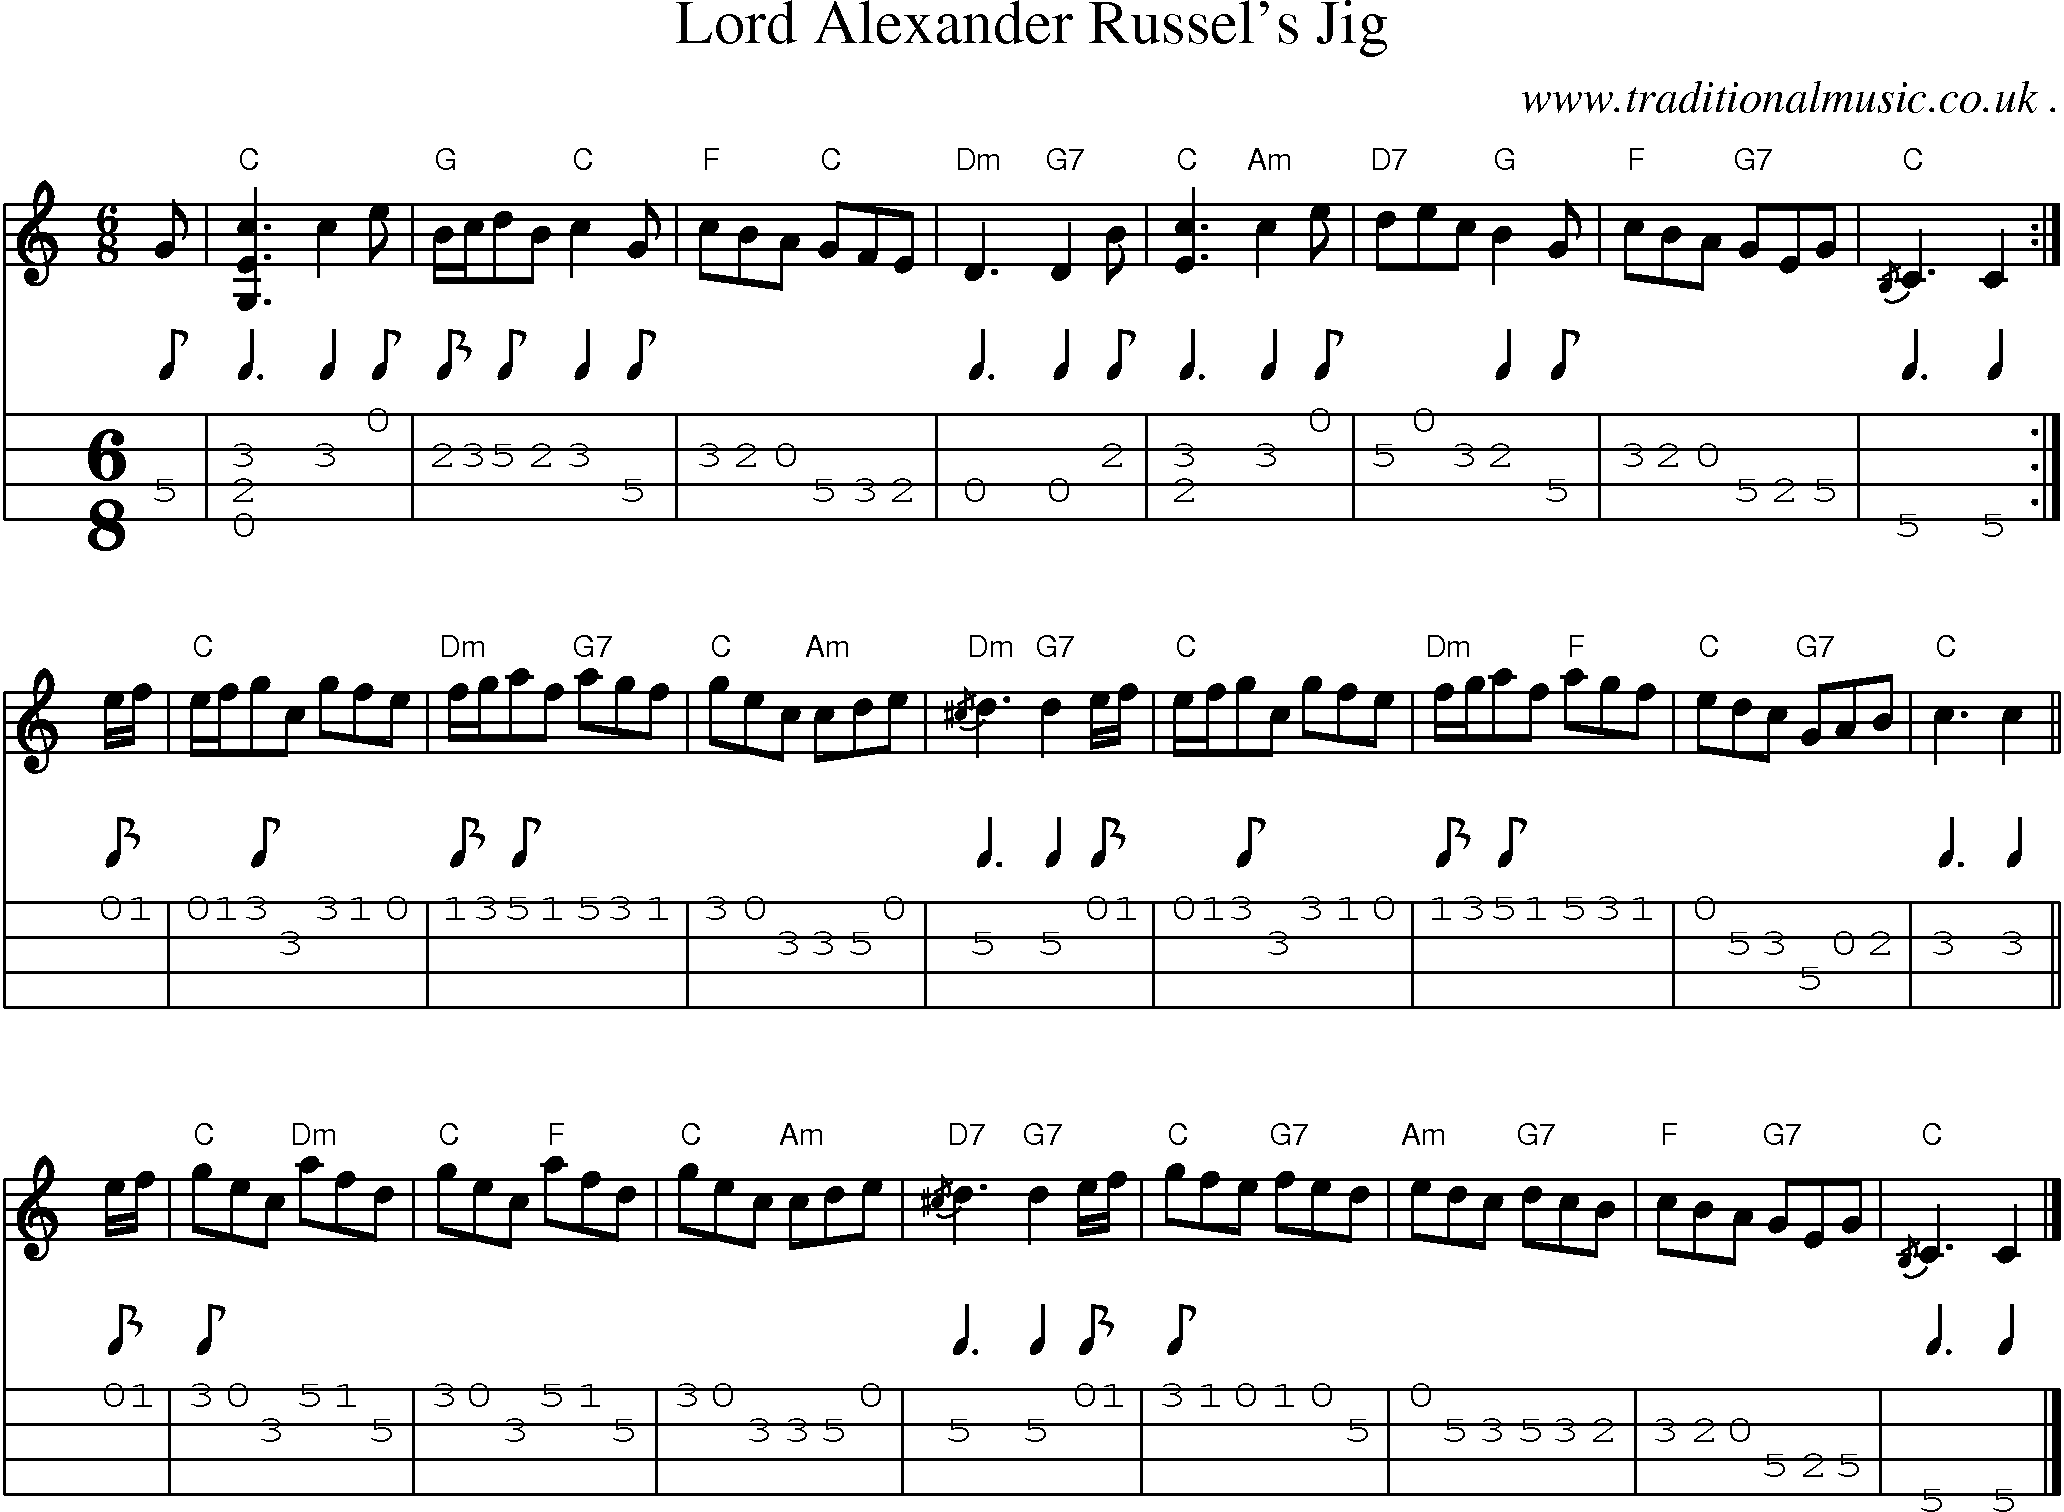 Sheet-music  score, Chords and Mandolin Tabs for Lord Alexander Russels Jig